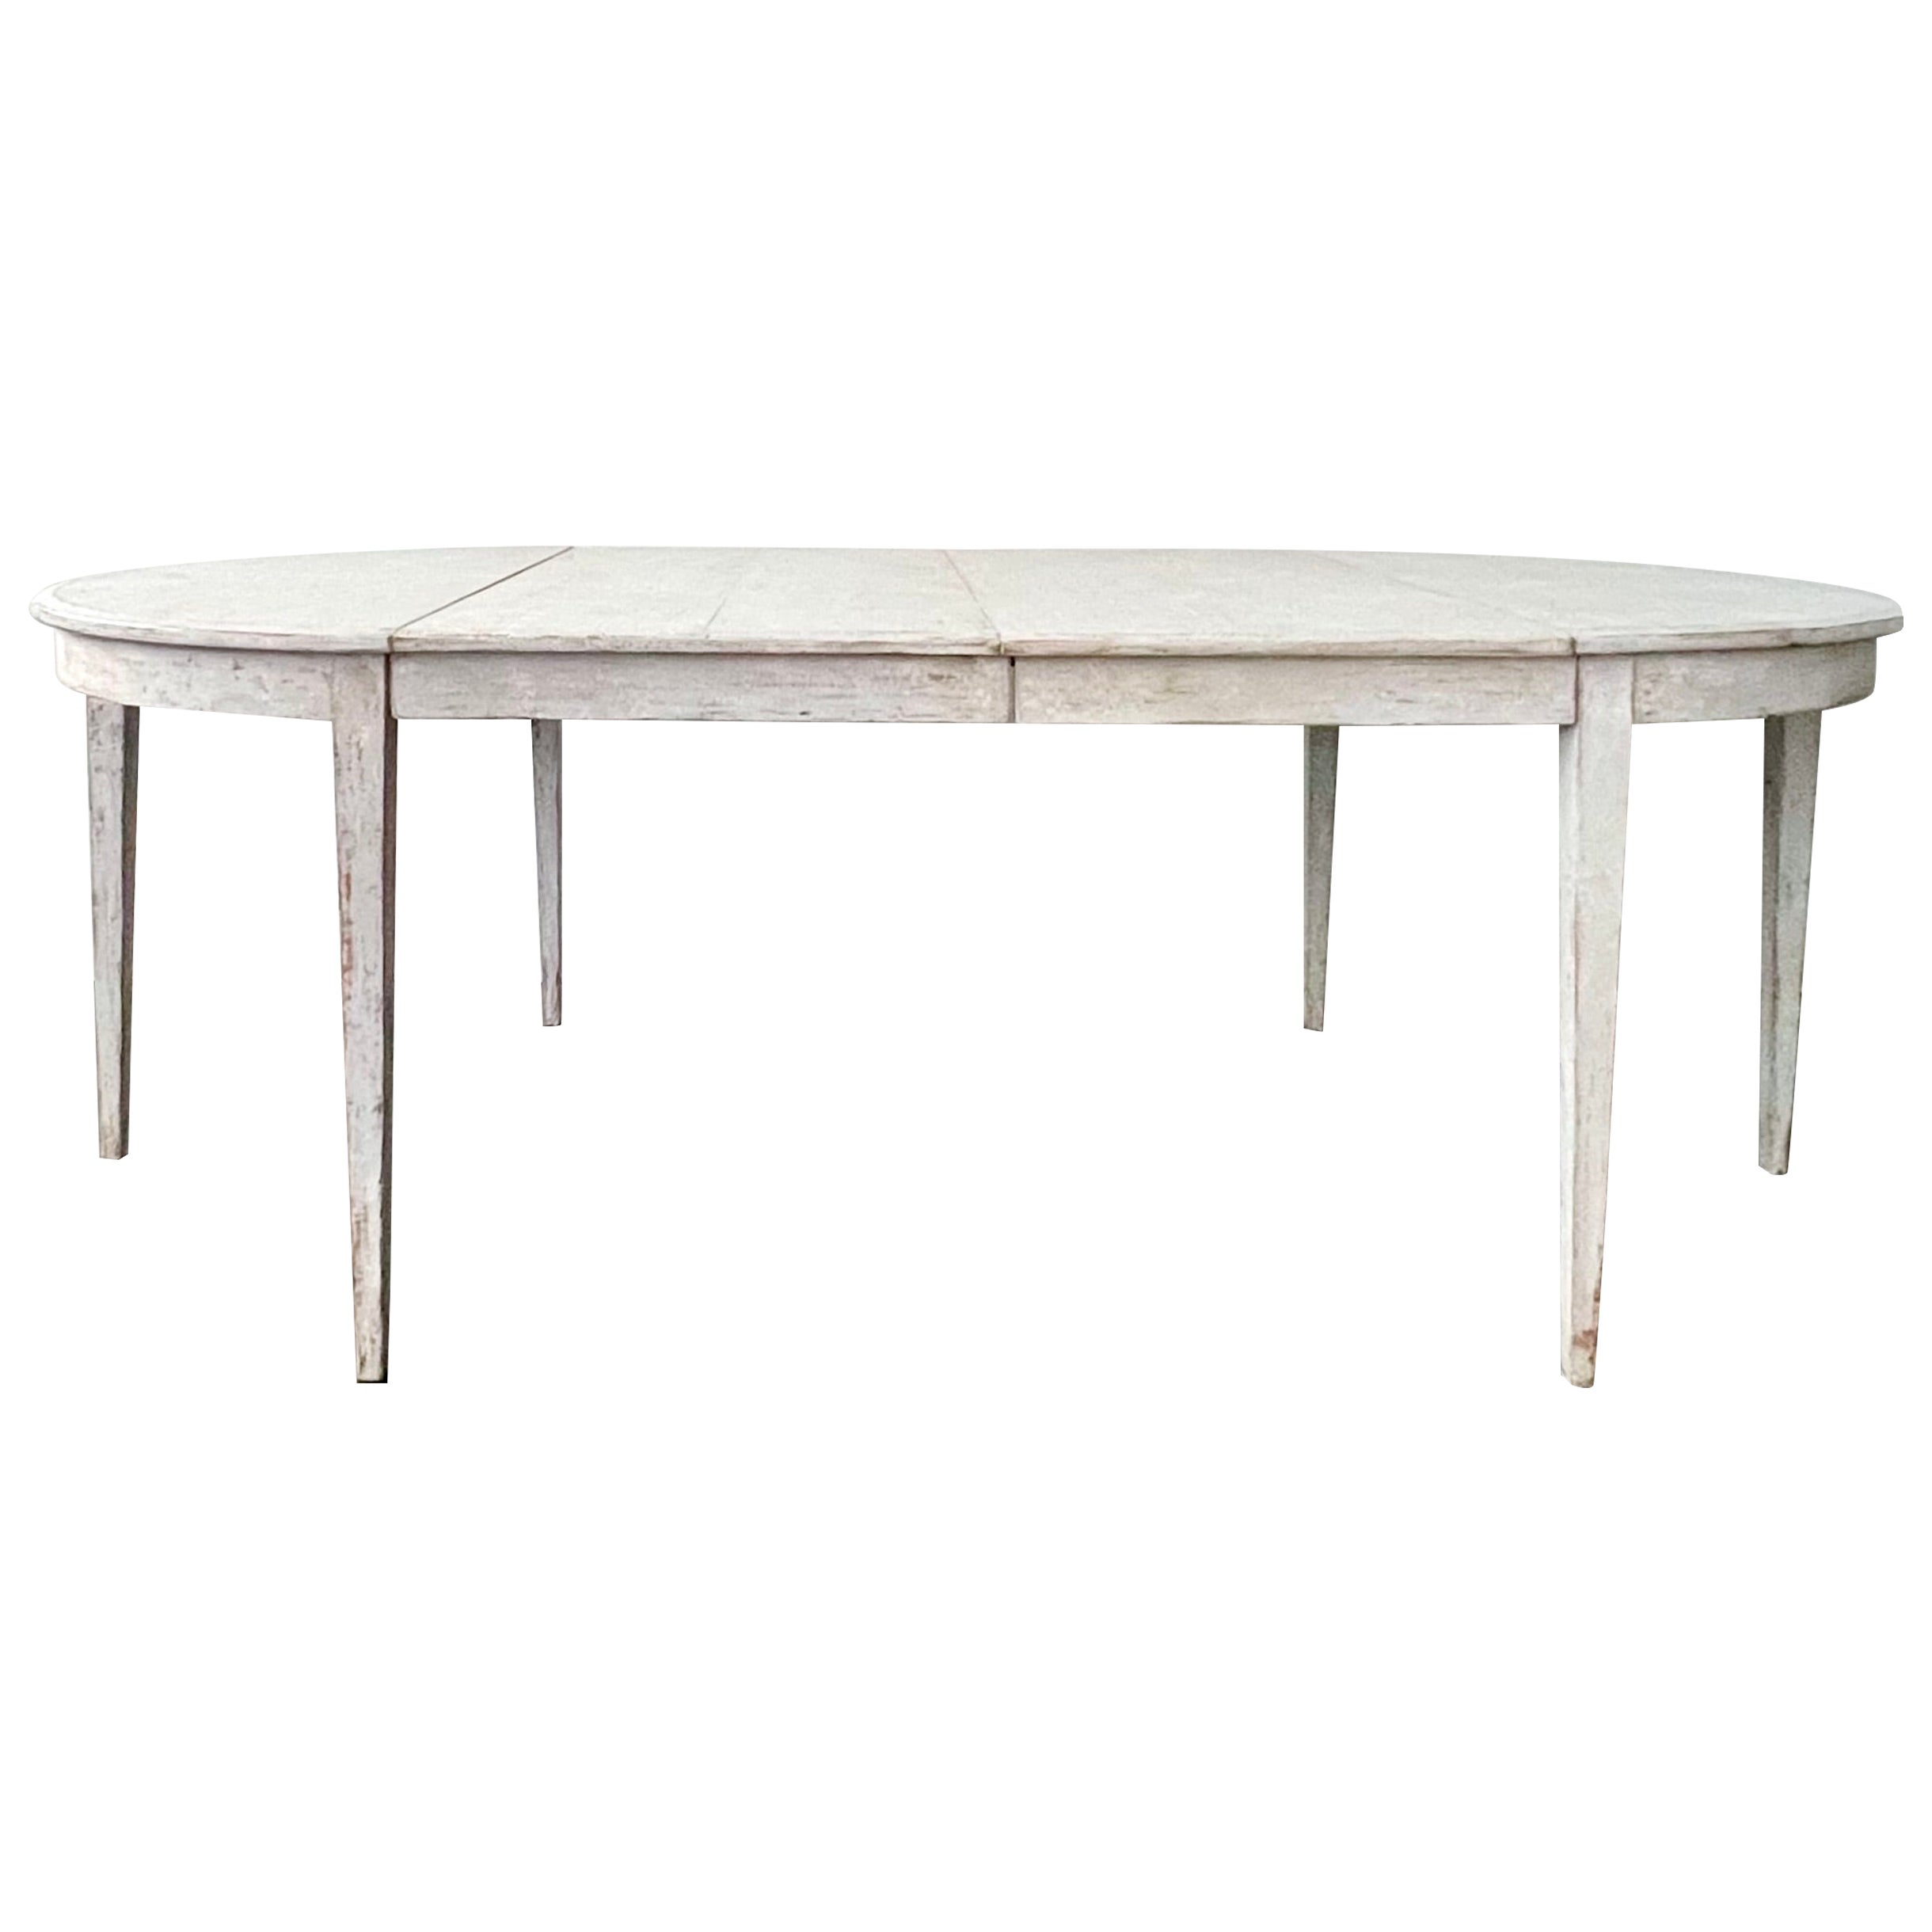 19th Century, 1820 Swedish Period Gustavian Extending Table For Sale